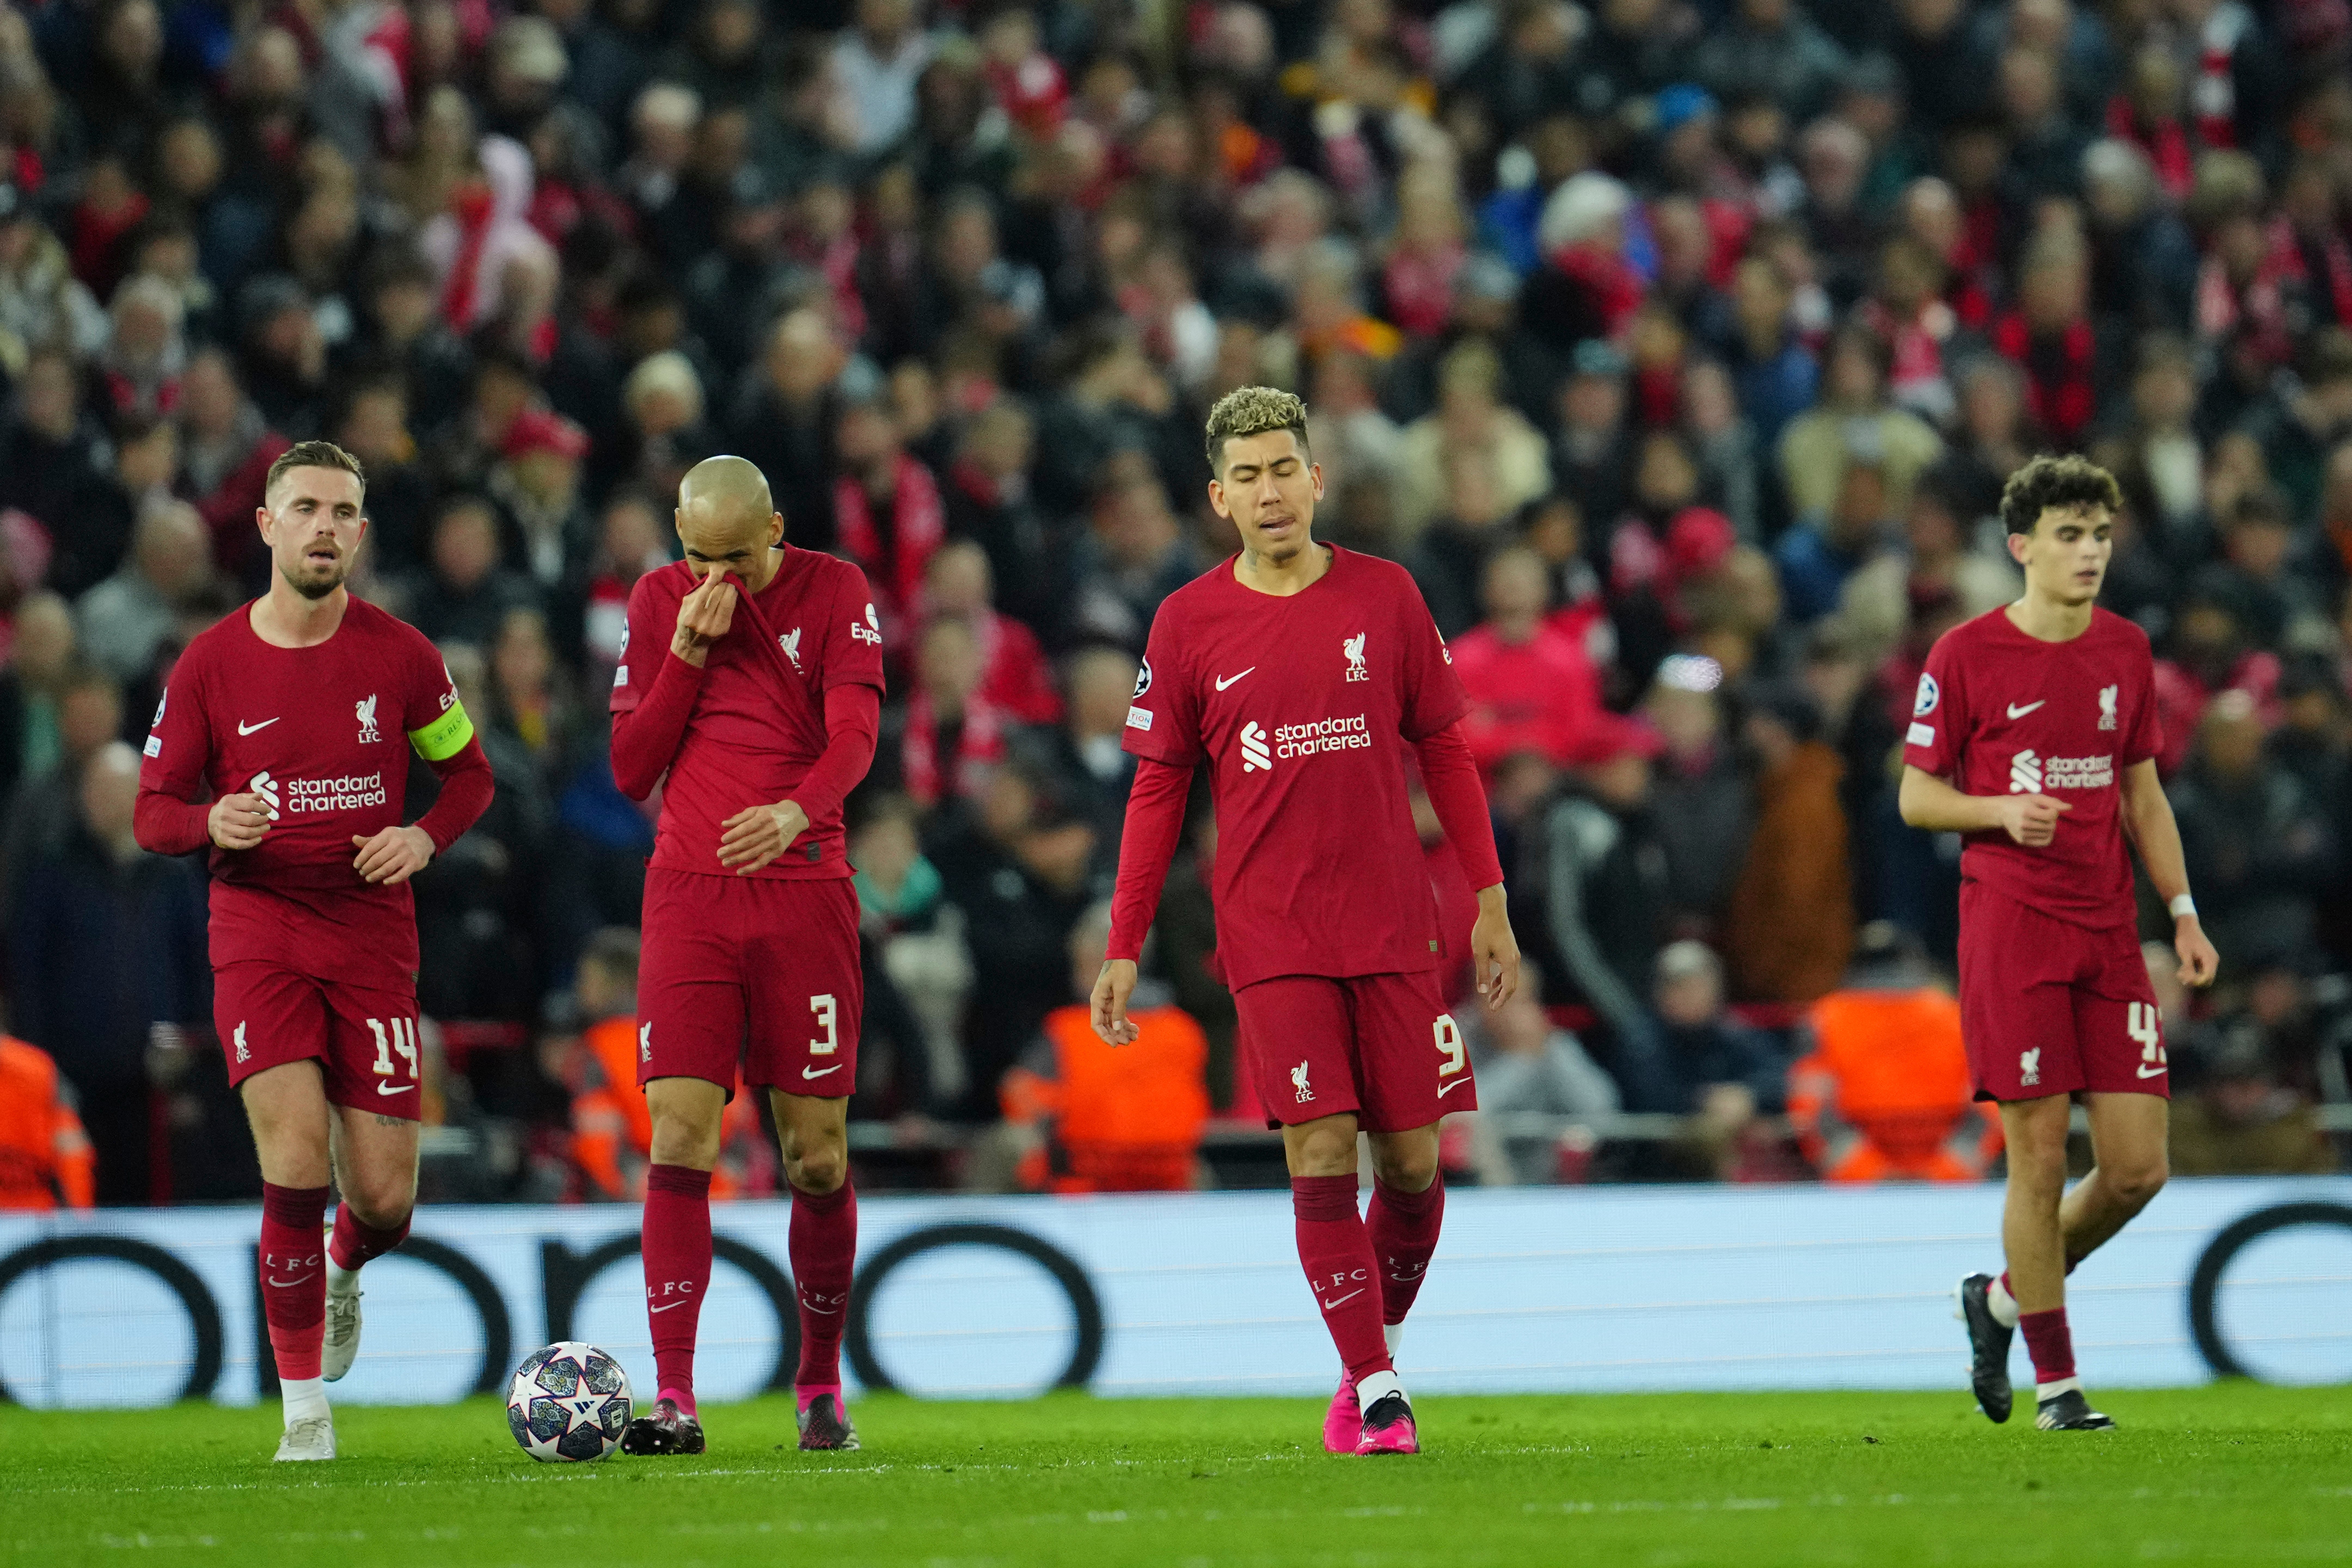 Liverpool suffered disappointment following their flying start at Anfield